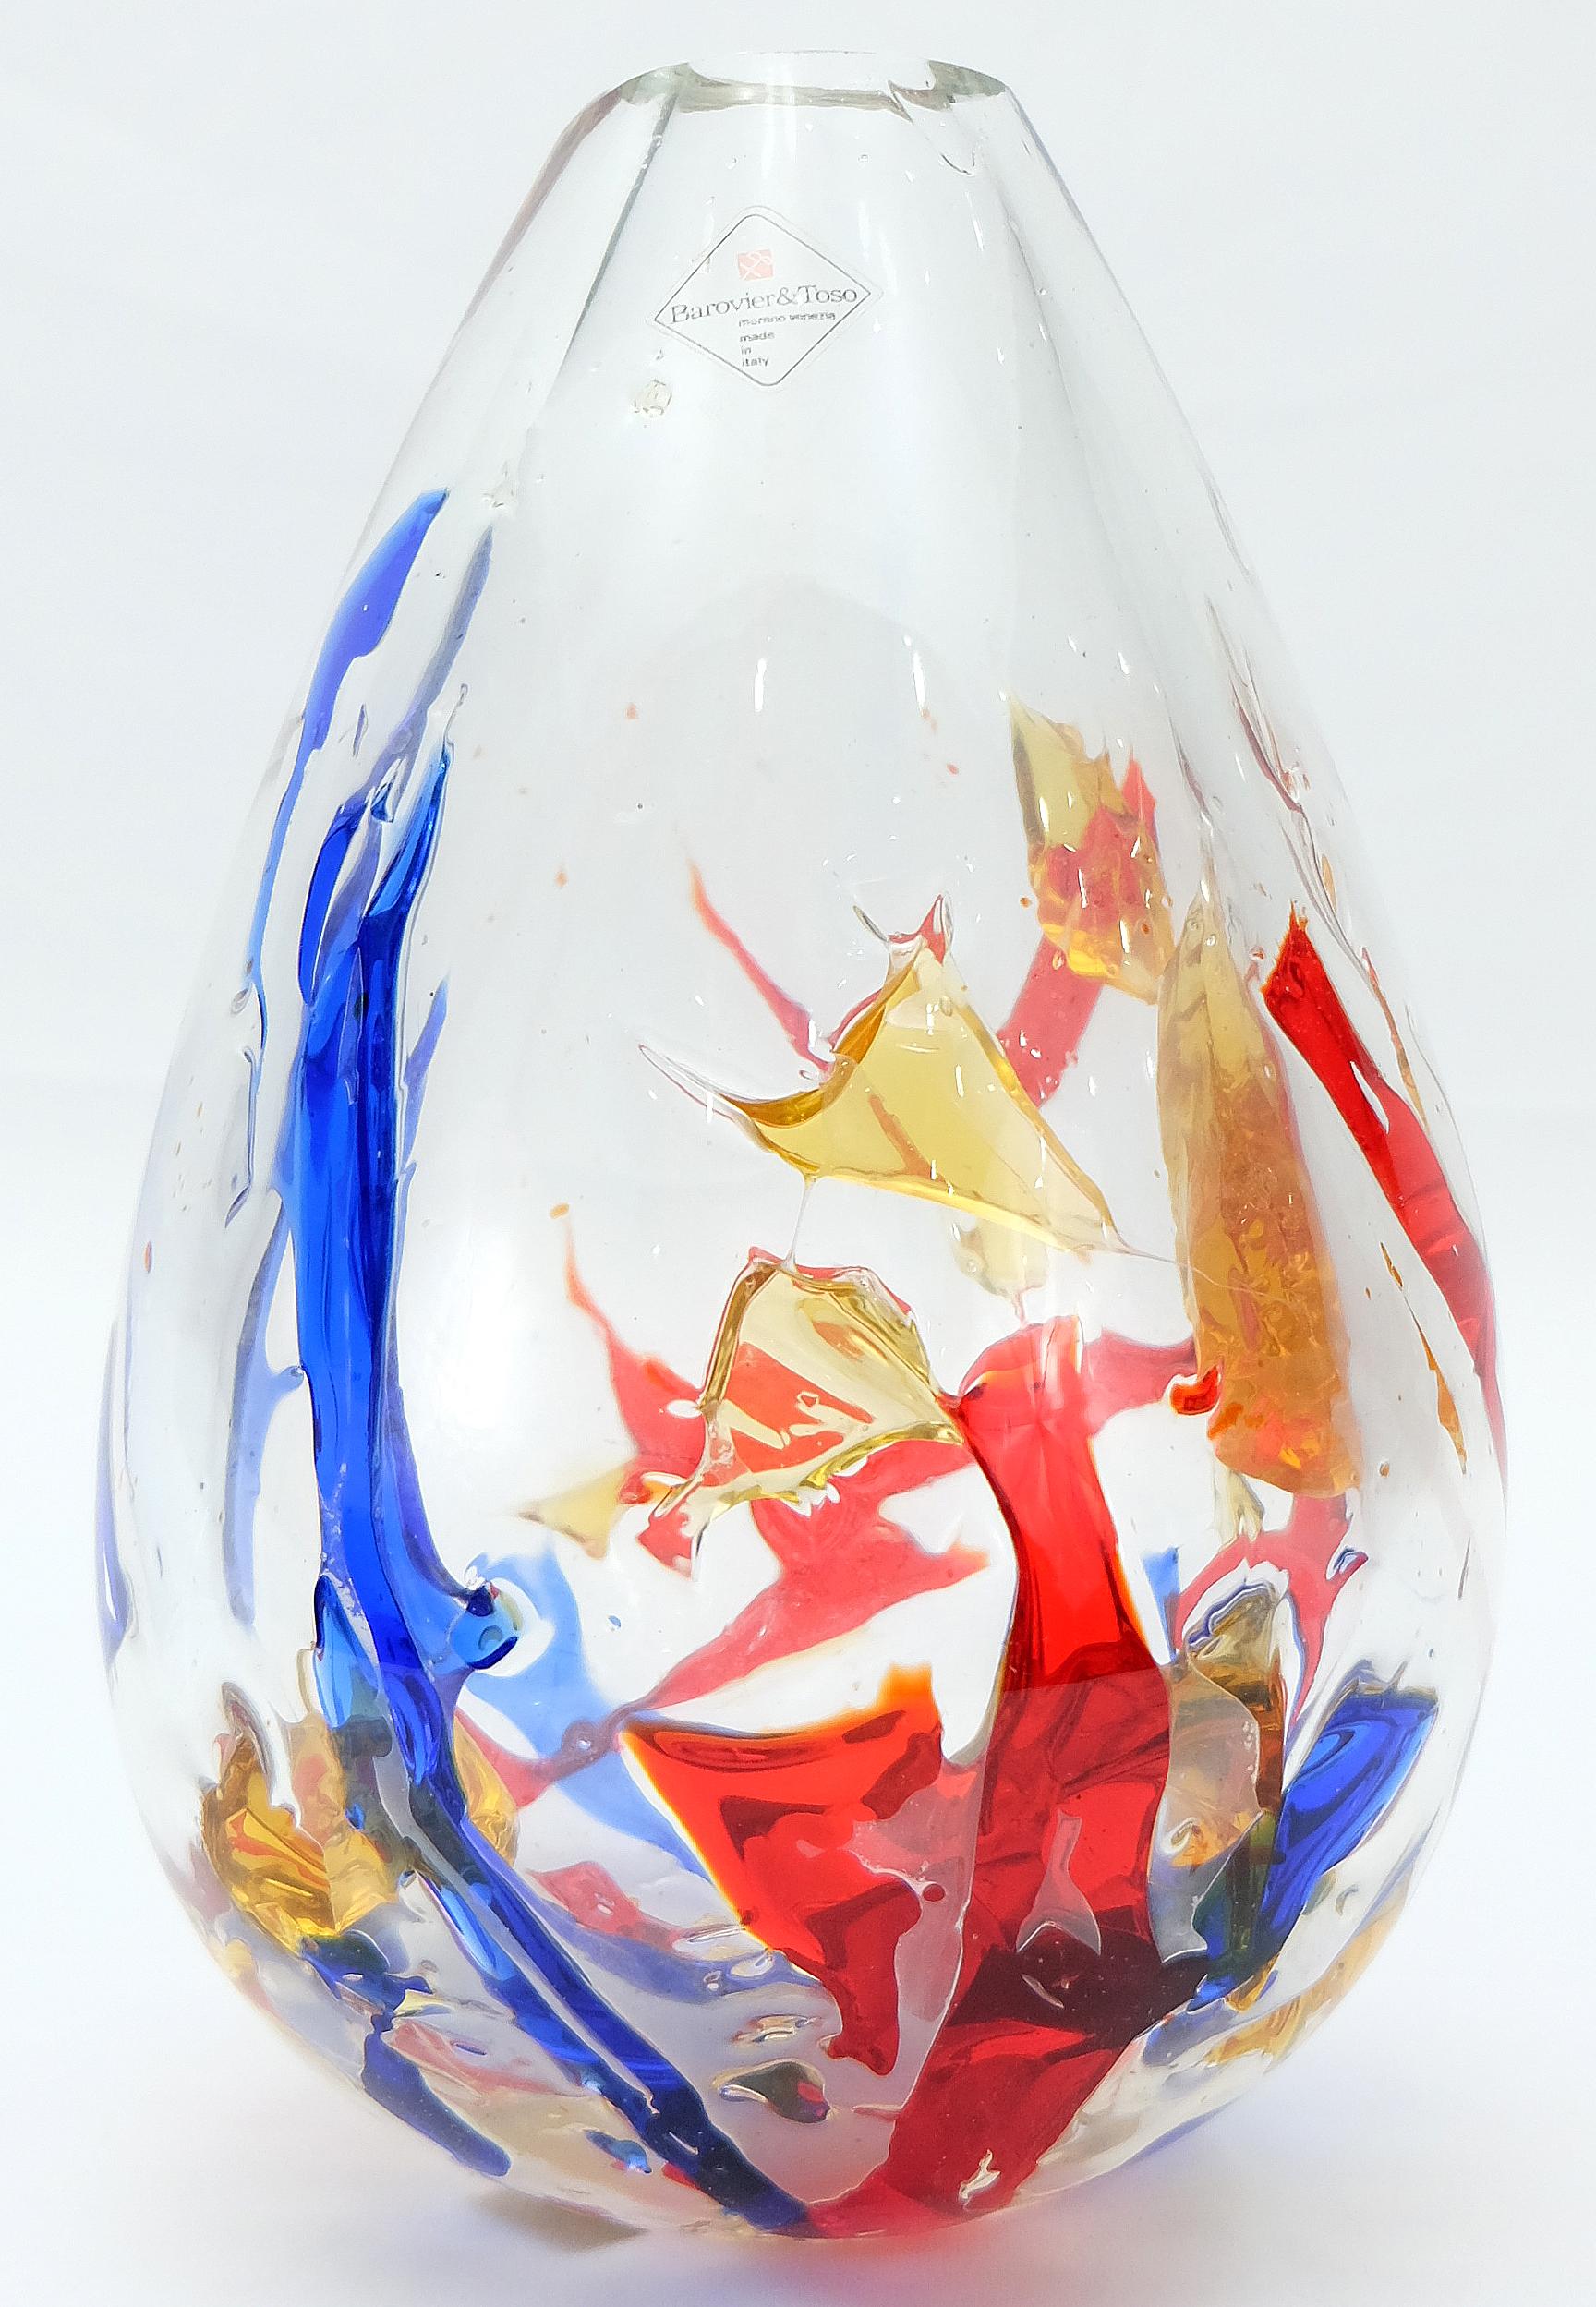 Barovier & Toso multi-color Murano glass vase from Italy offered for sale is a fabulous hand blown Barovier & Toso multi-color Murano glass vase. This spectacular work of art is signed on the base and retains all of the original labels.